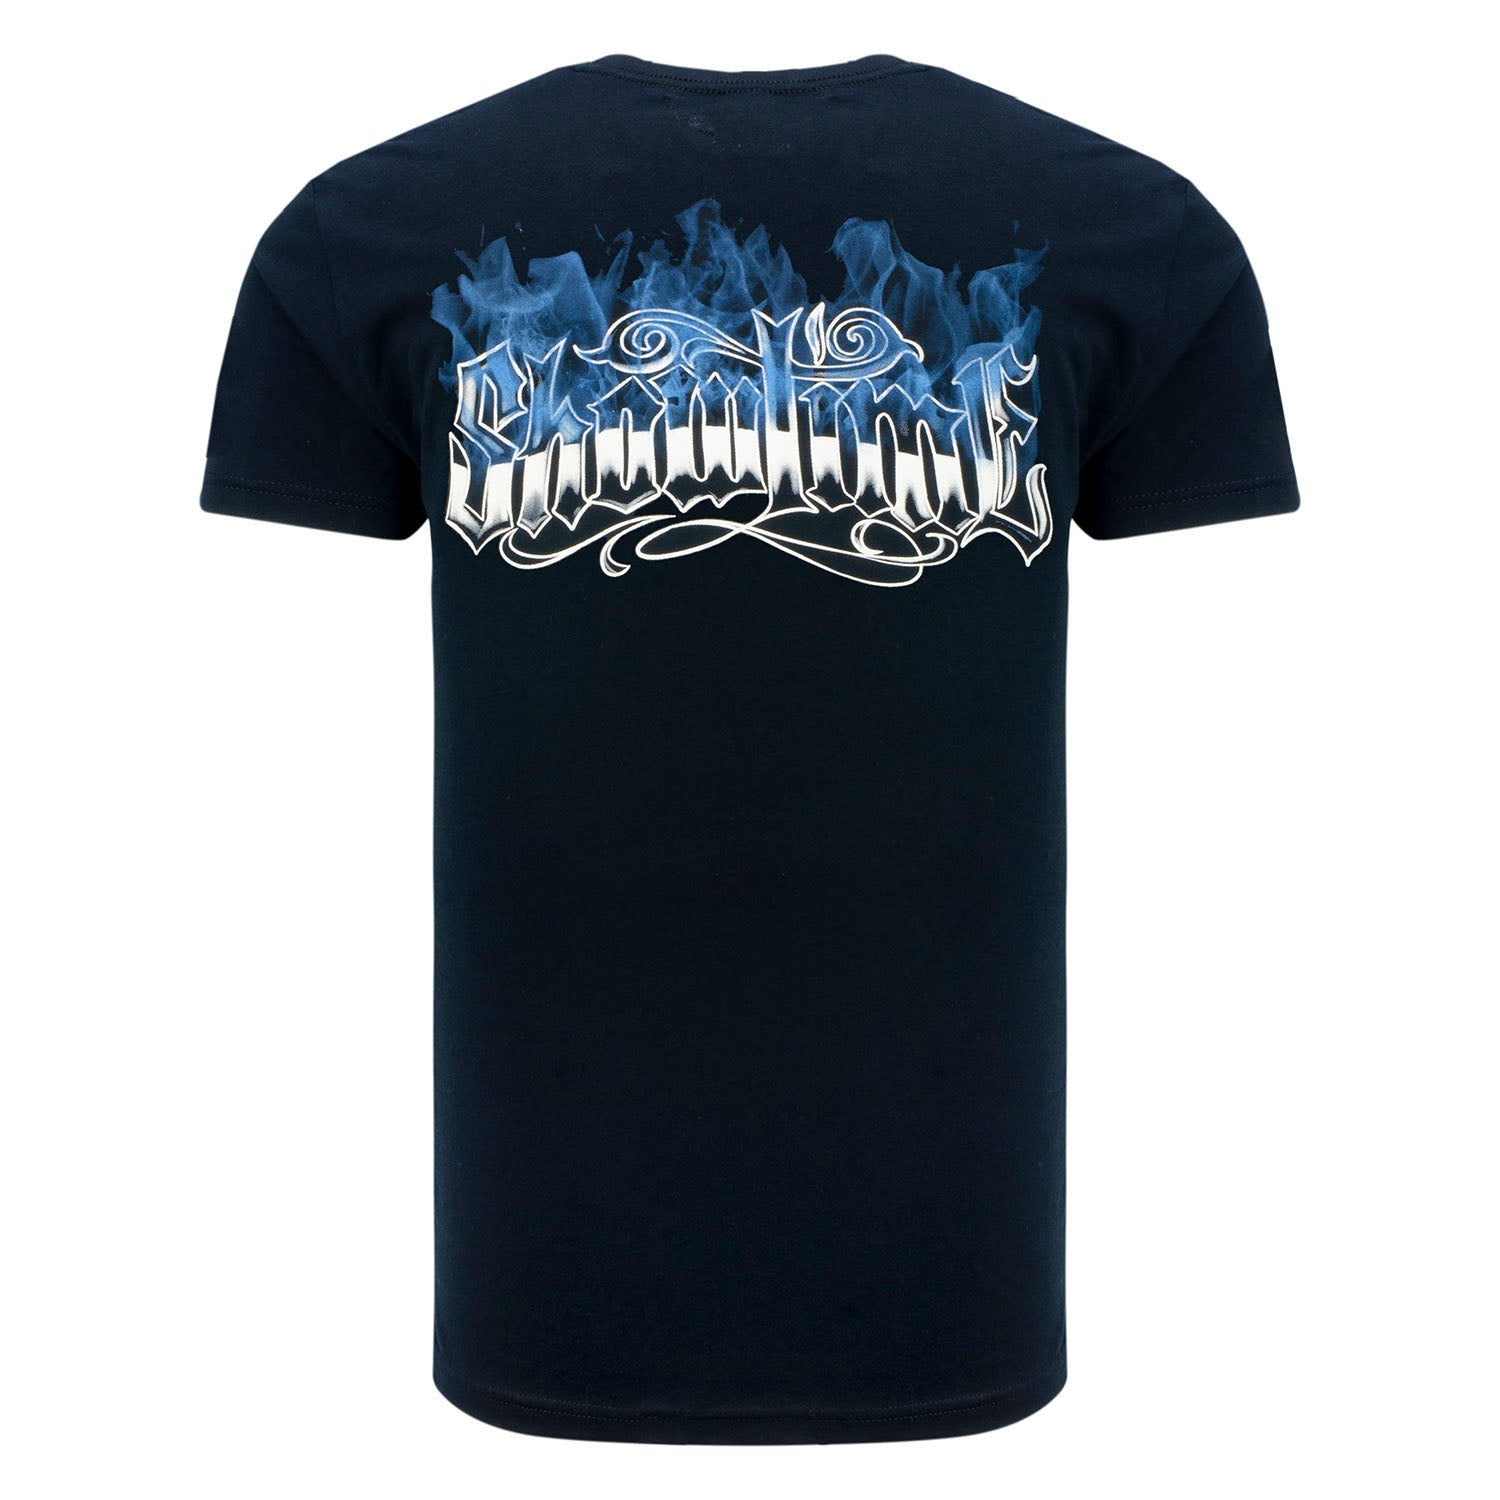 Pettis Showtime Shirt in Black - Back View